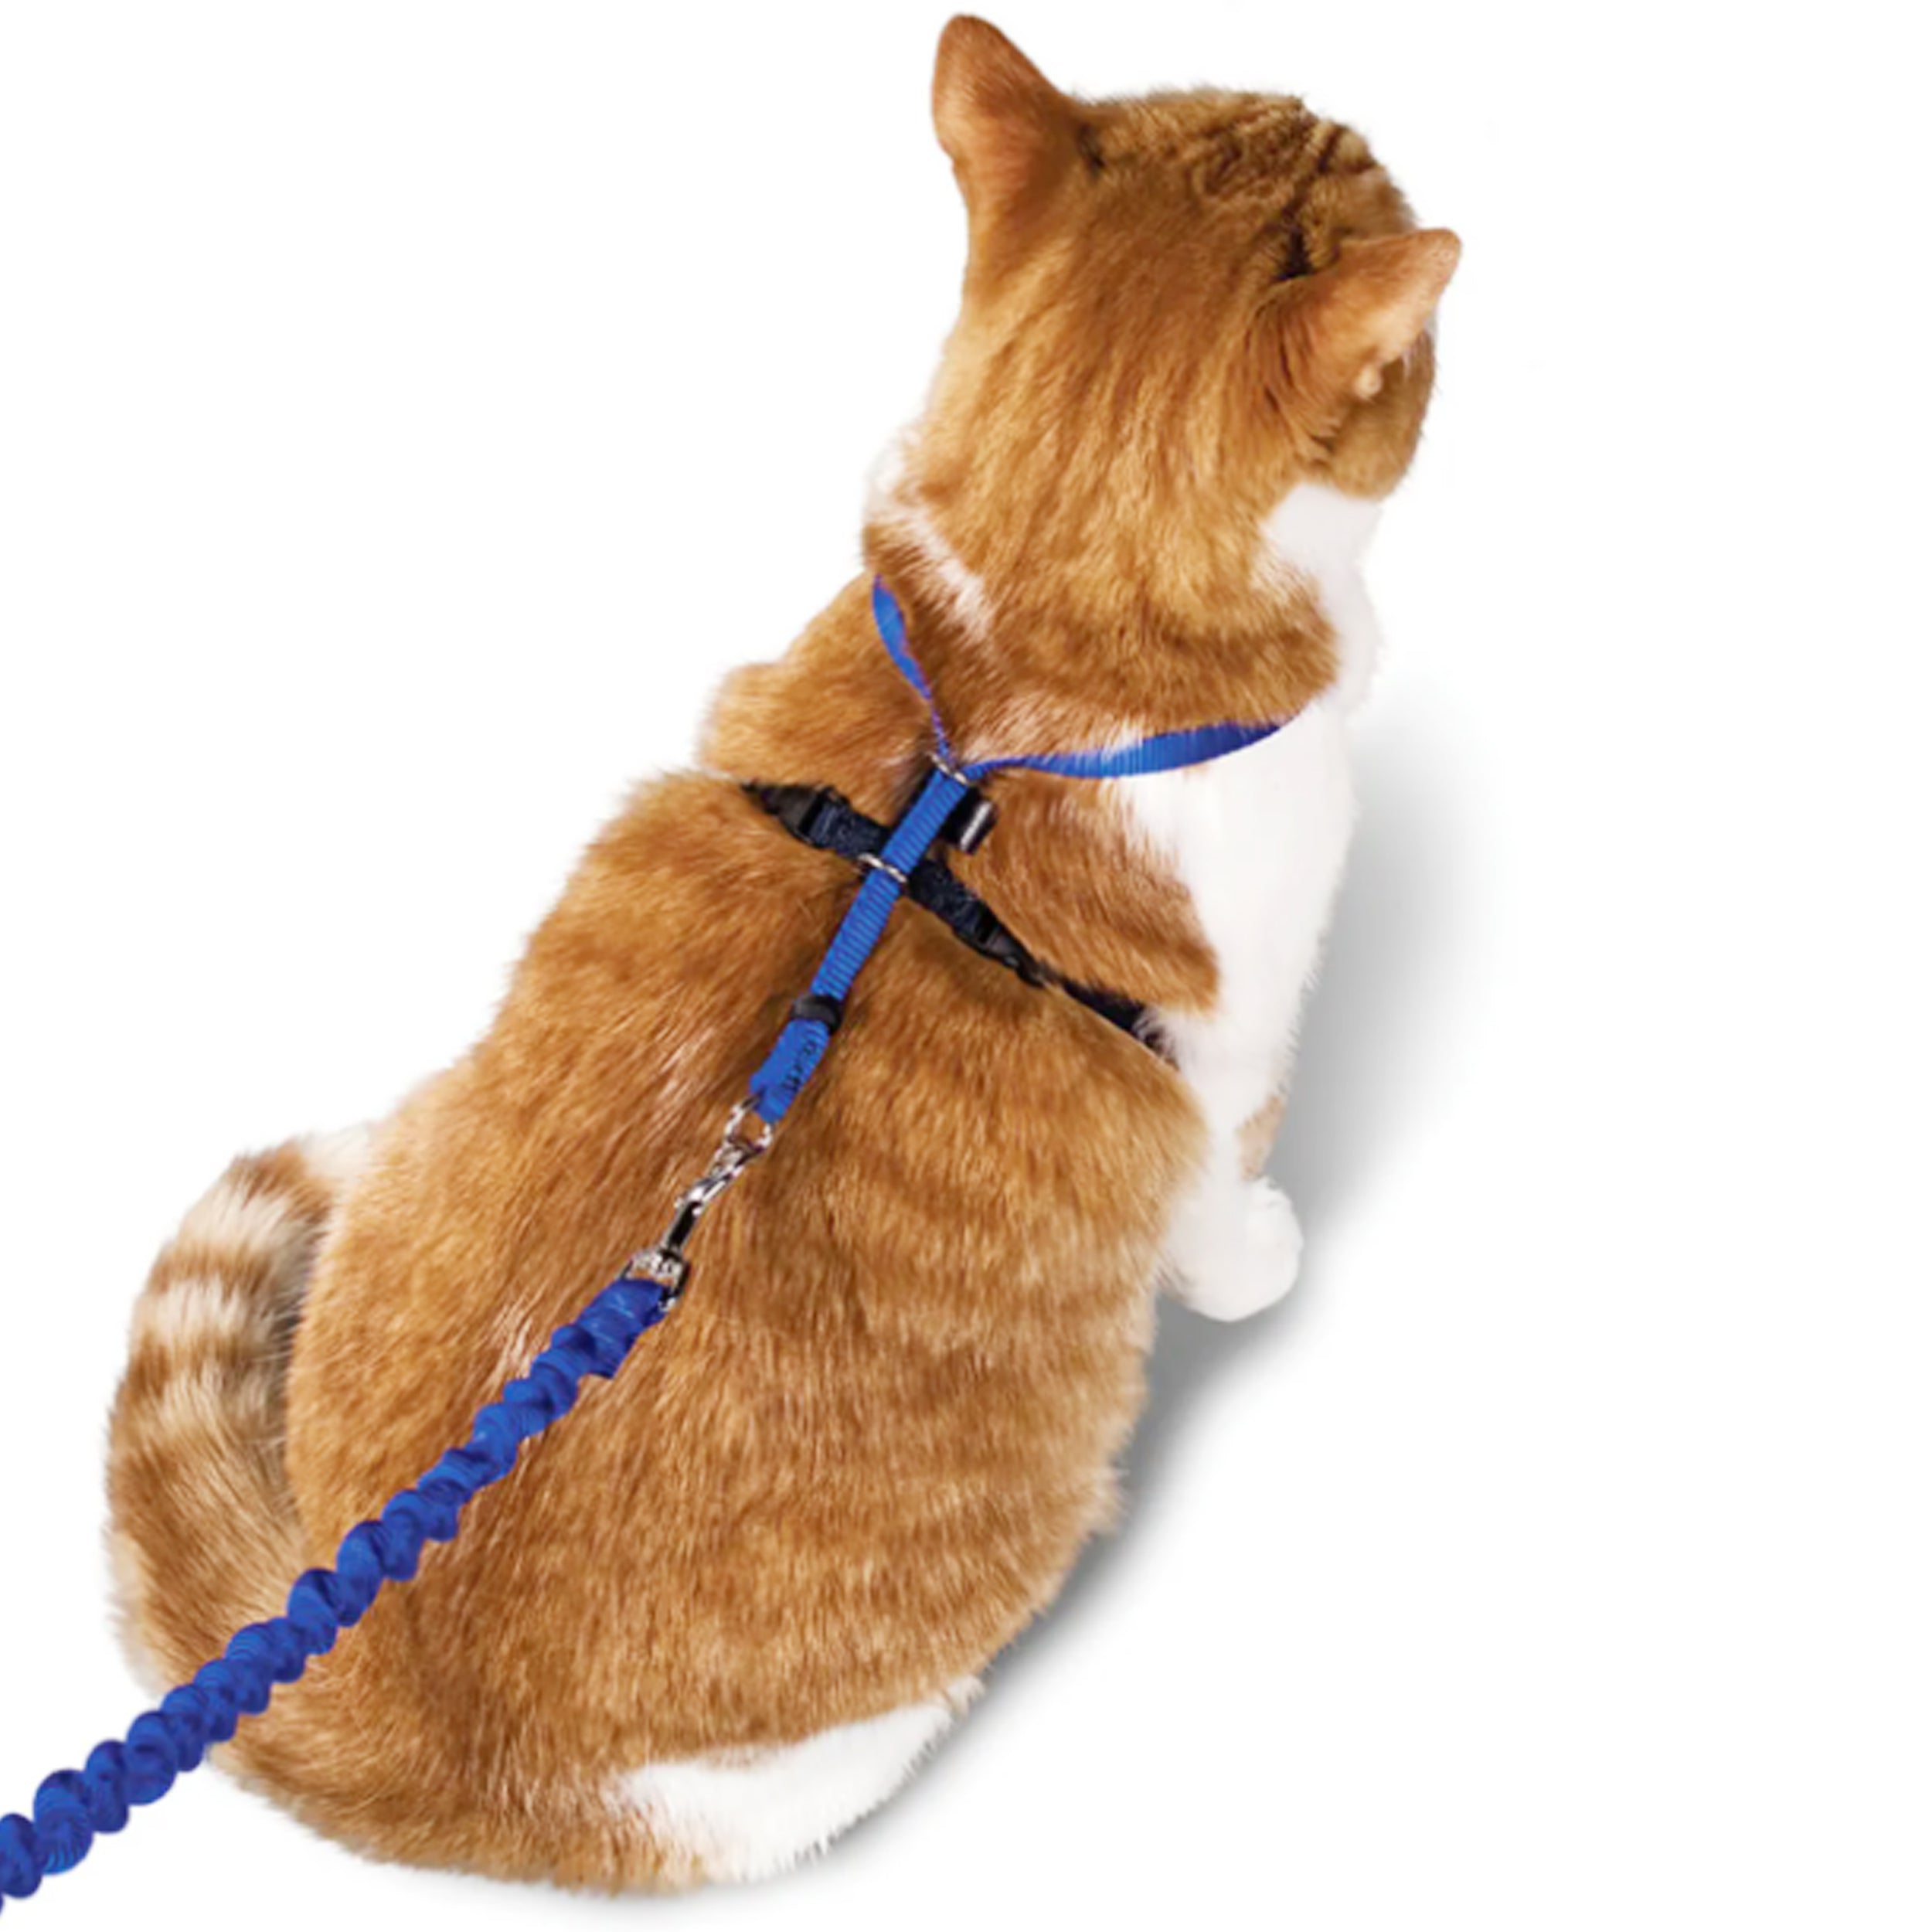 Come With Me Kitty Cat Harness for Adventurous Cats and Kittens